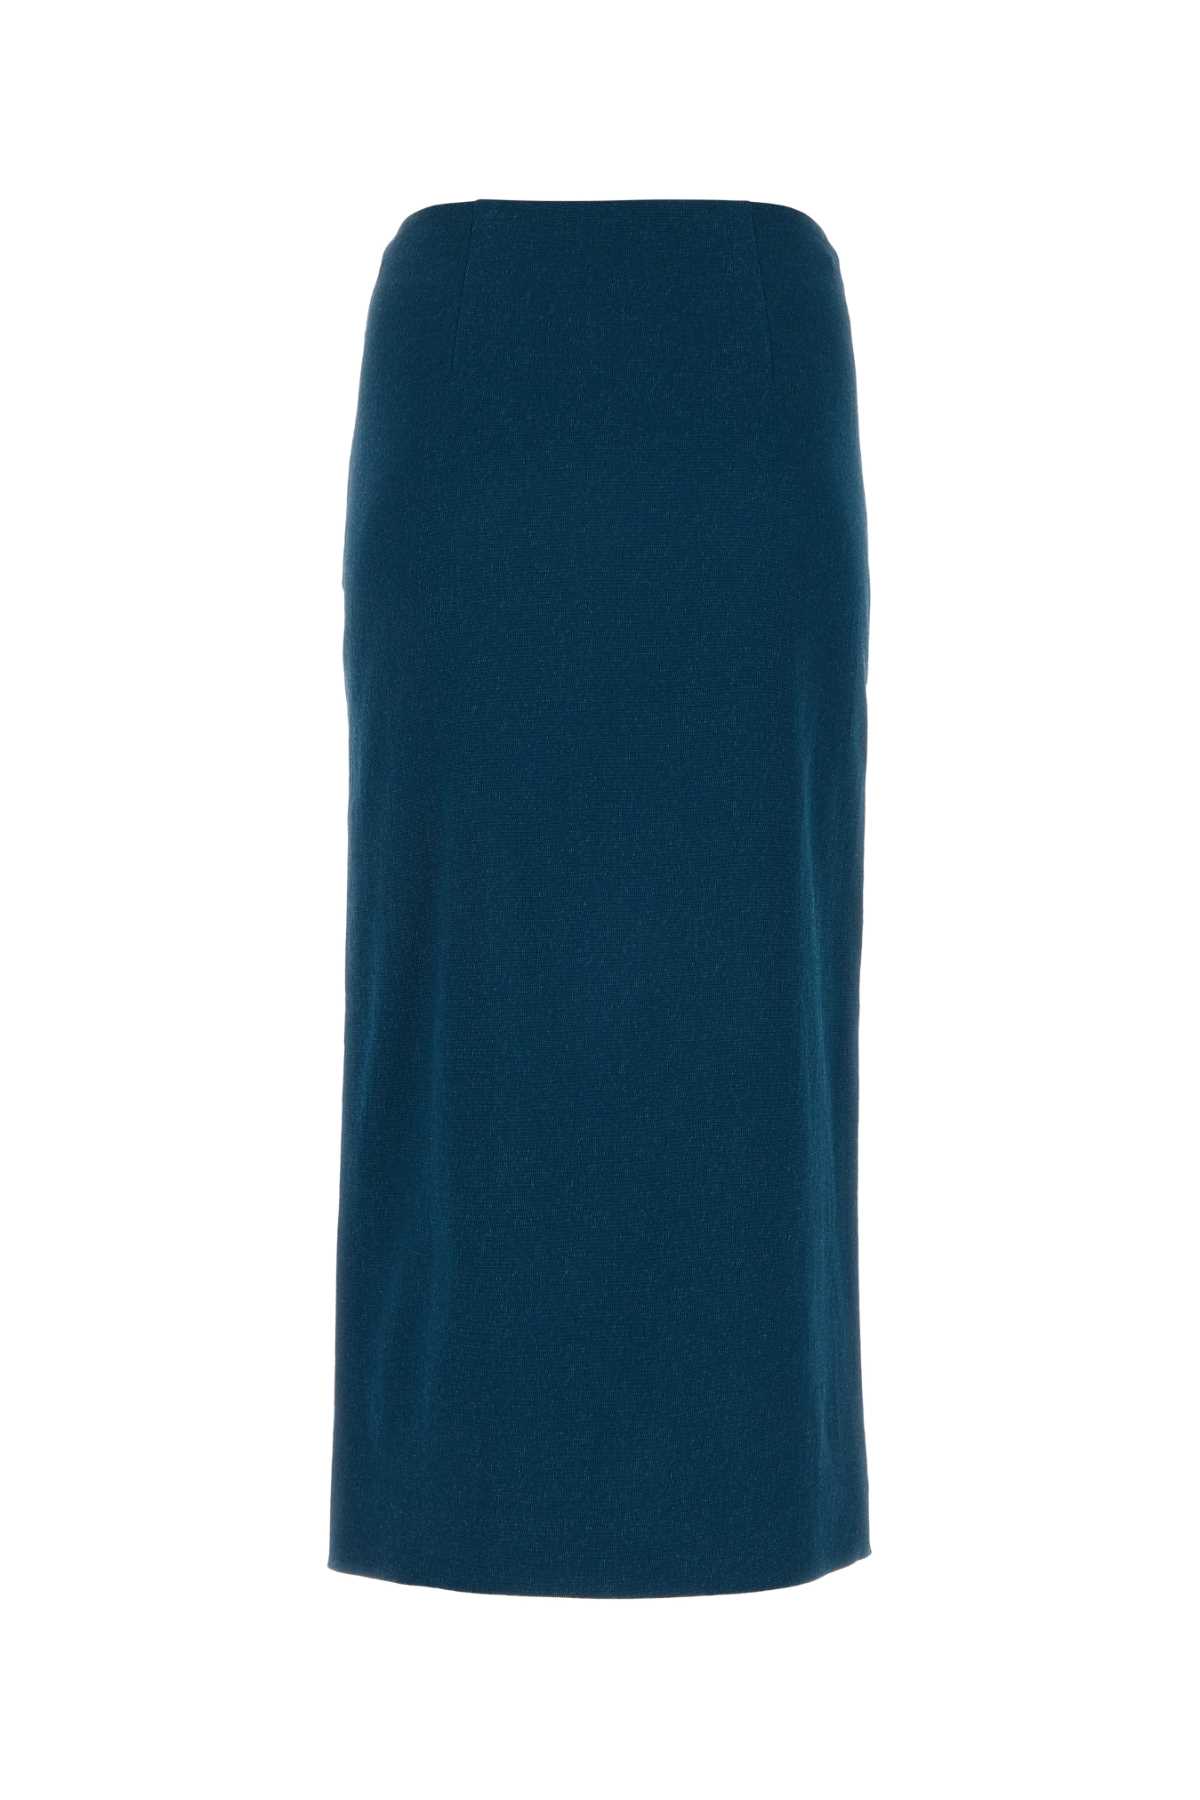 Tory Burch Teal Green Faille Skirt In Solarblue